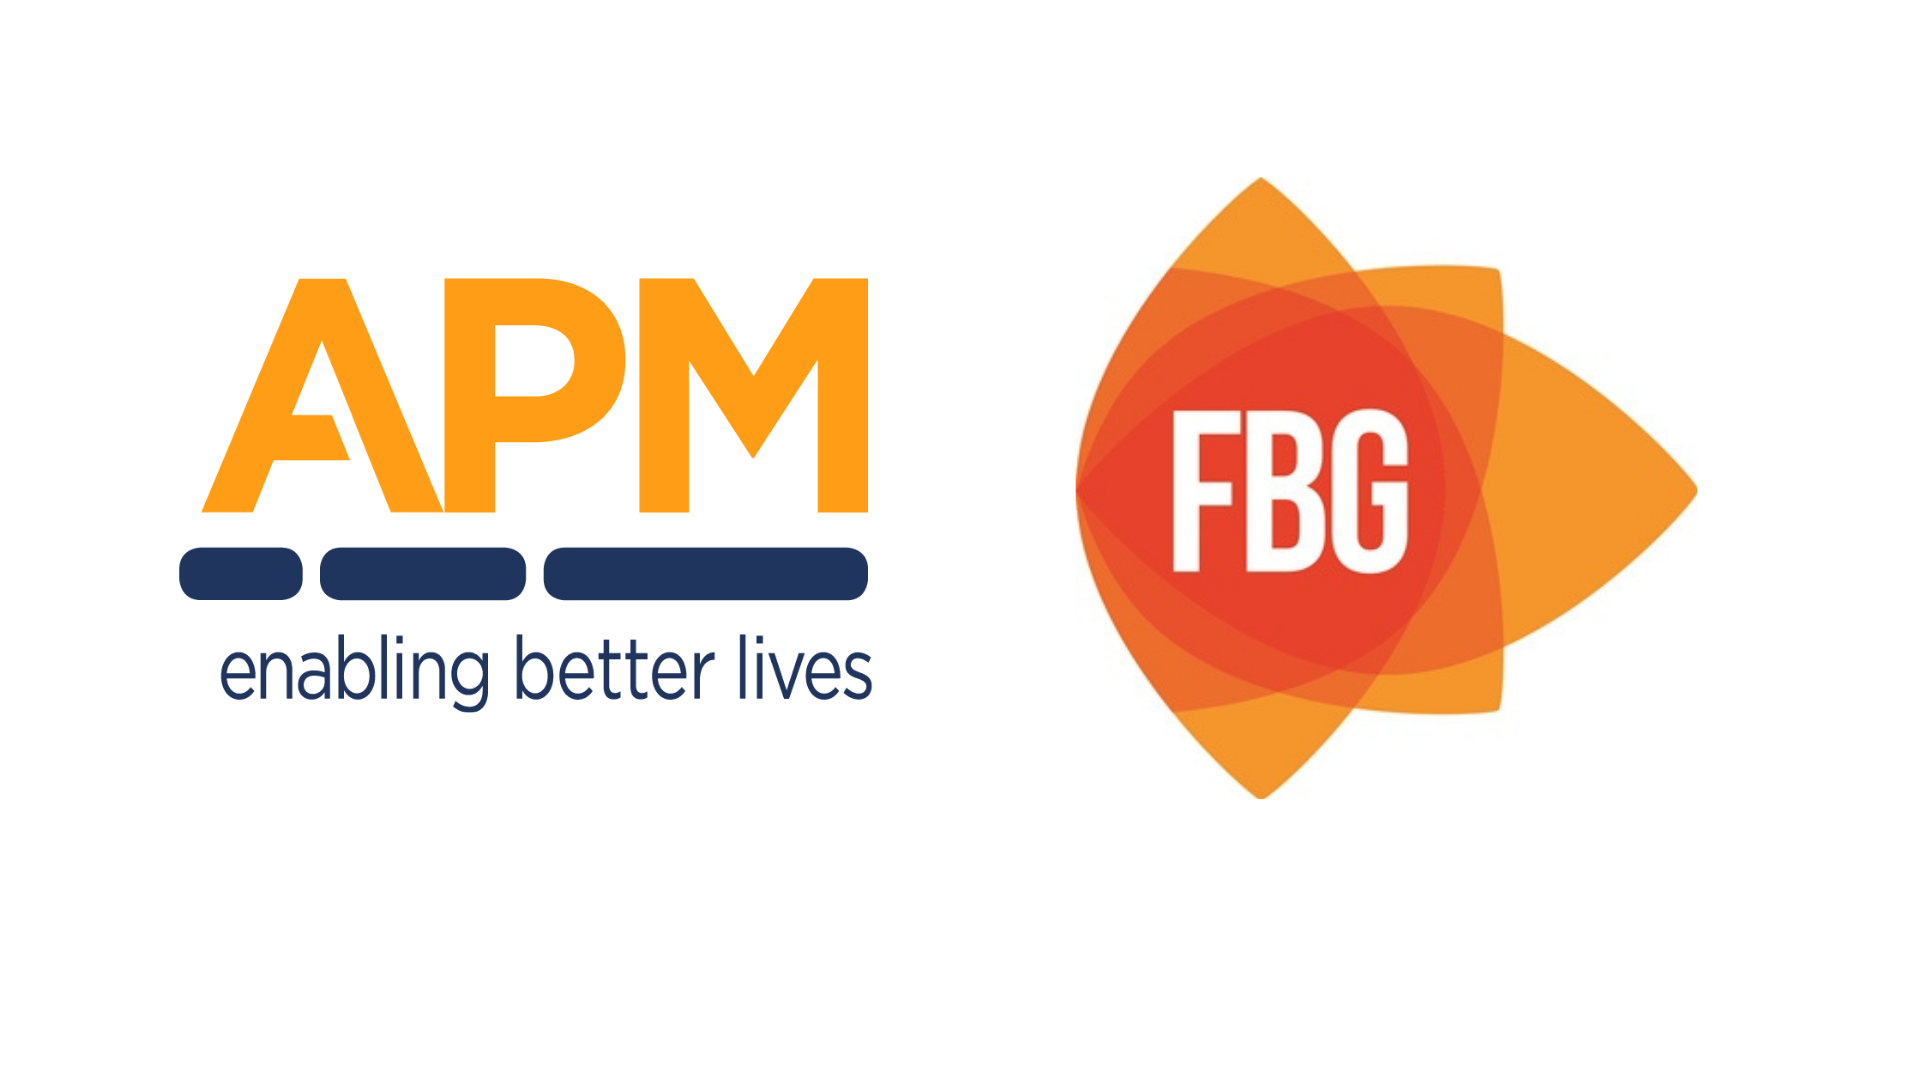 APM and FGB logos